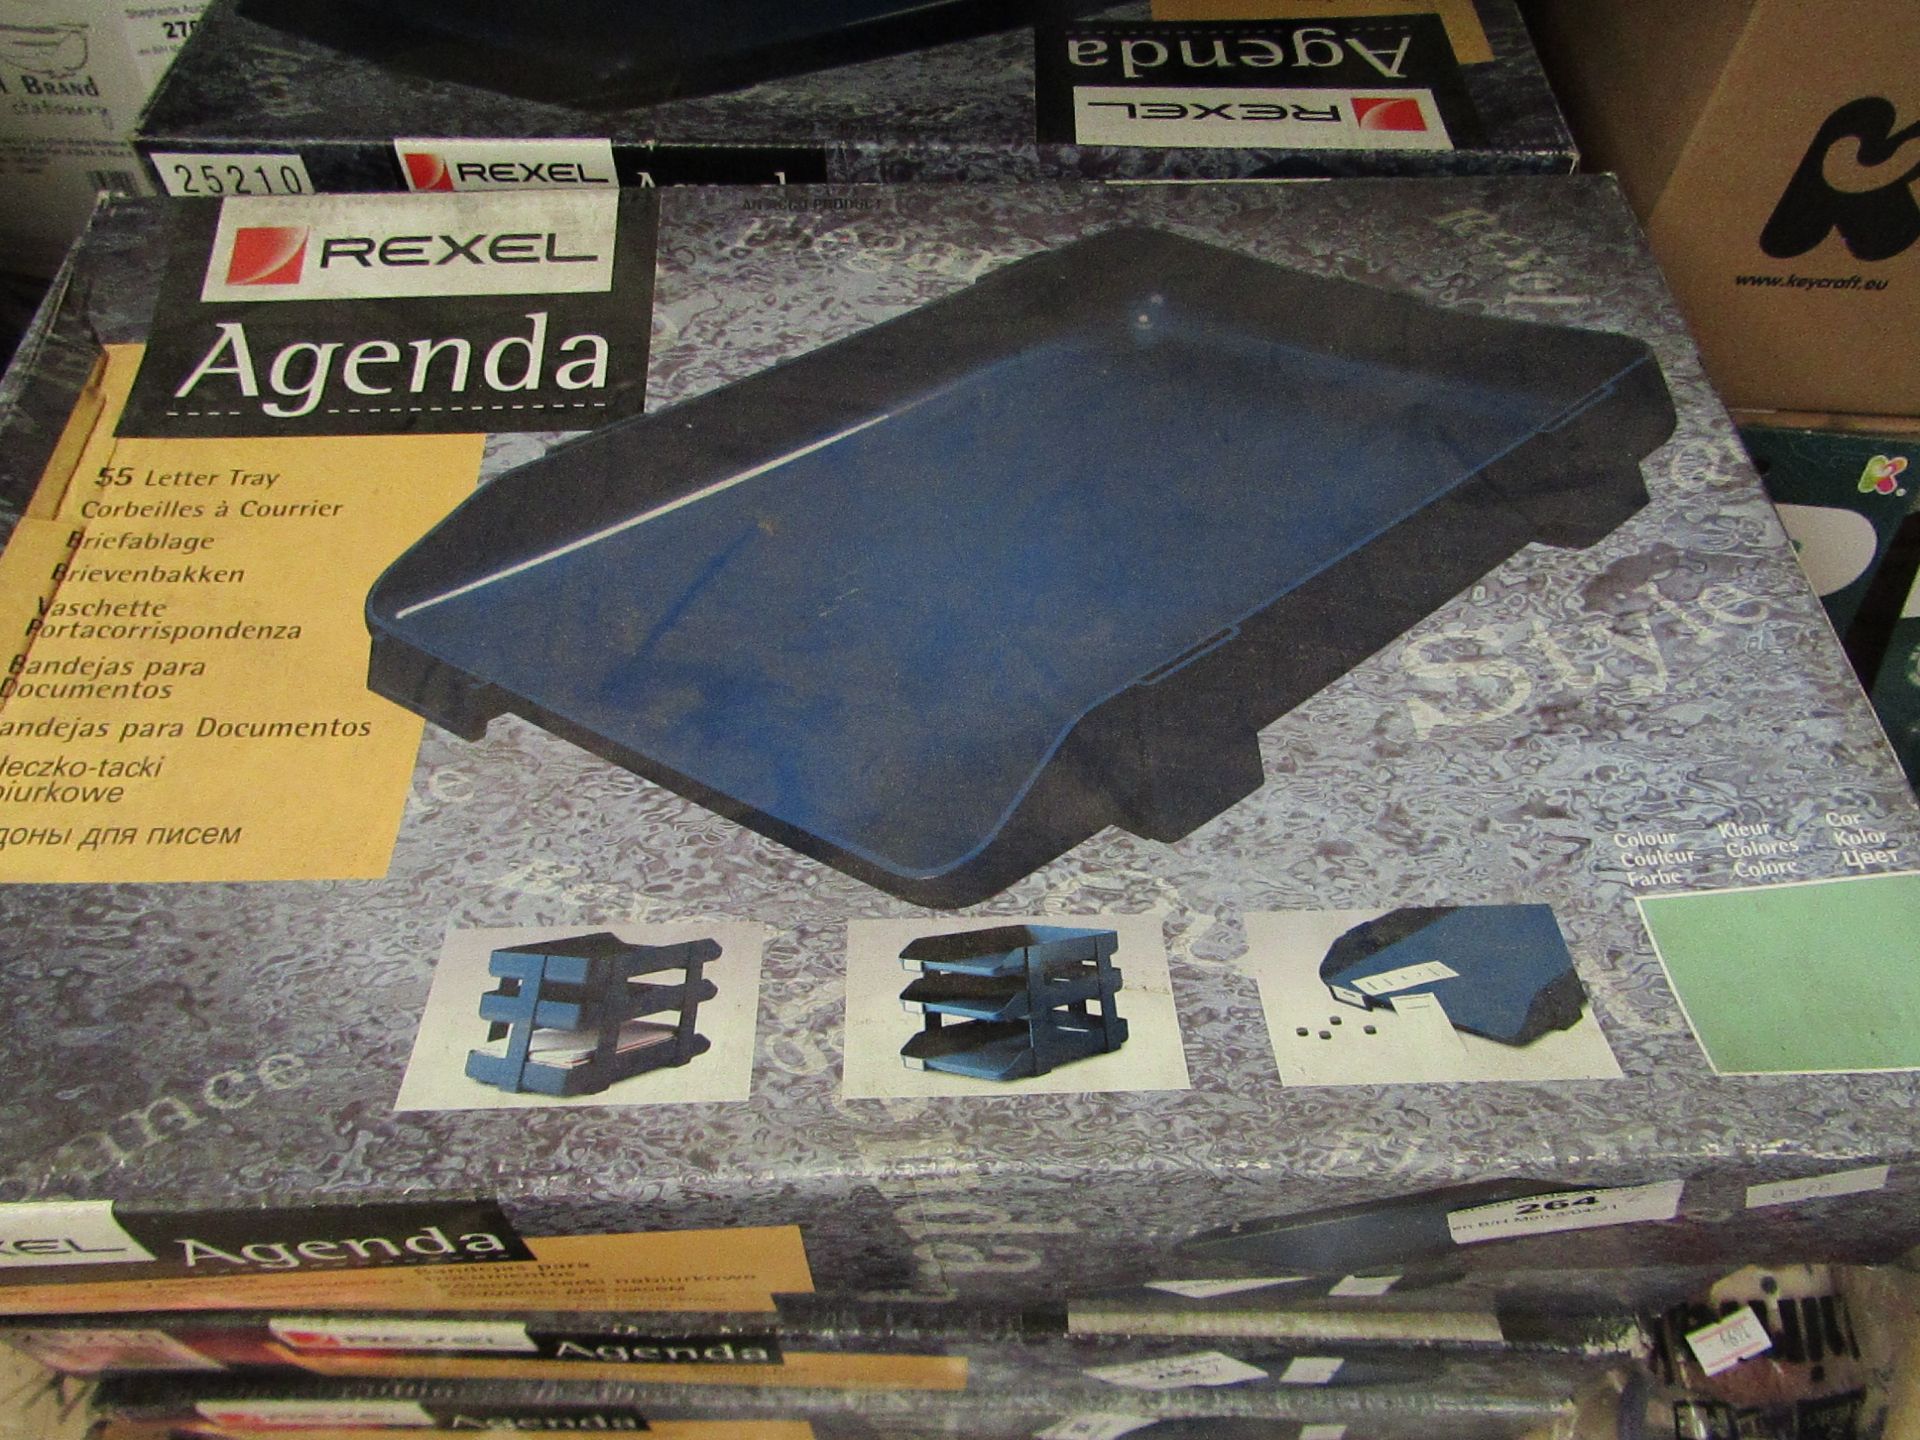 2x Rexel - Agenda 55 Letter Tray - Unchecked & Boxed.